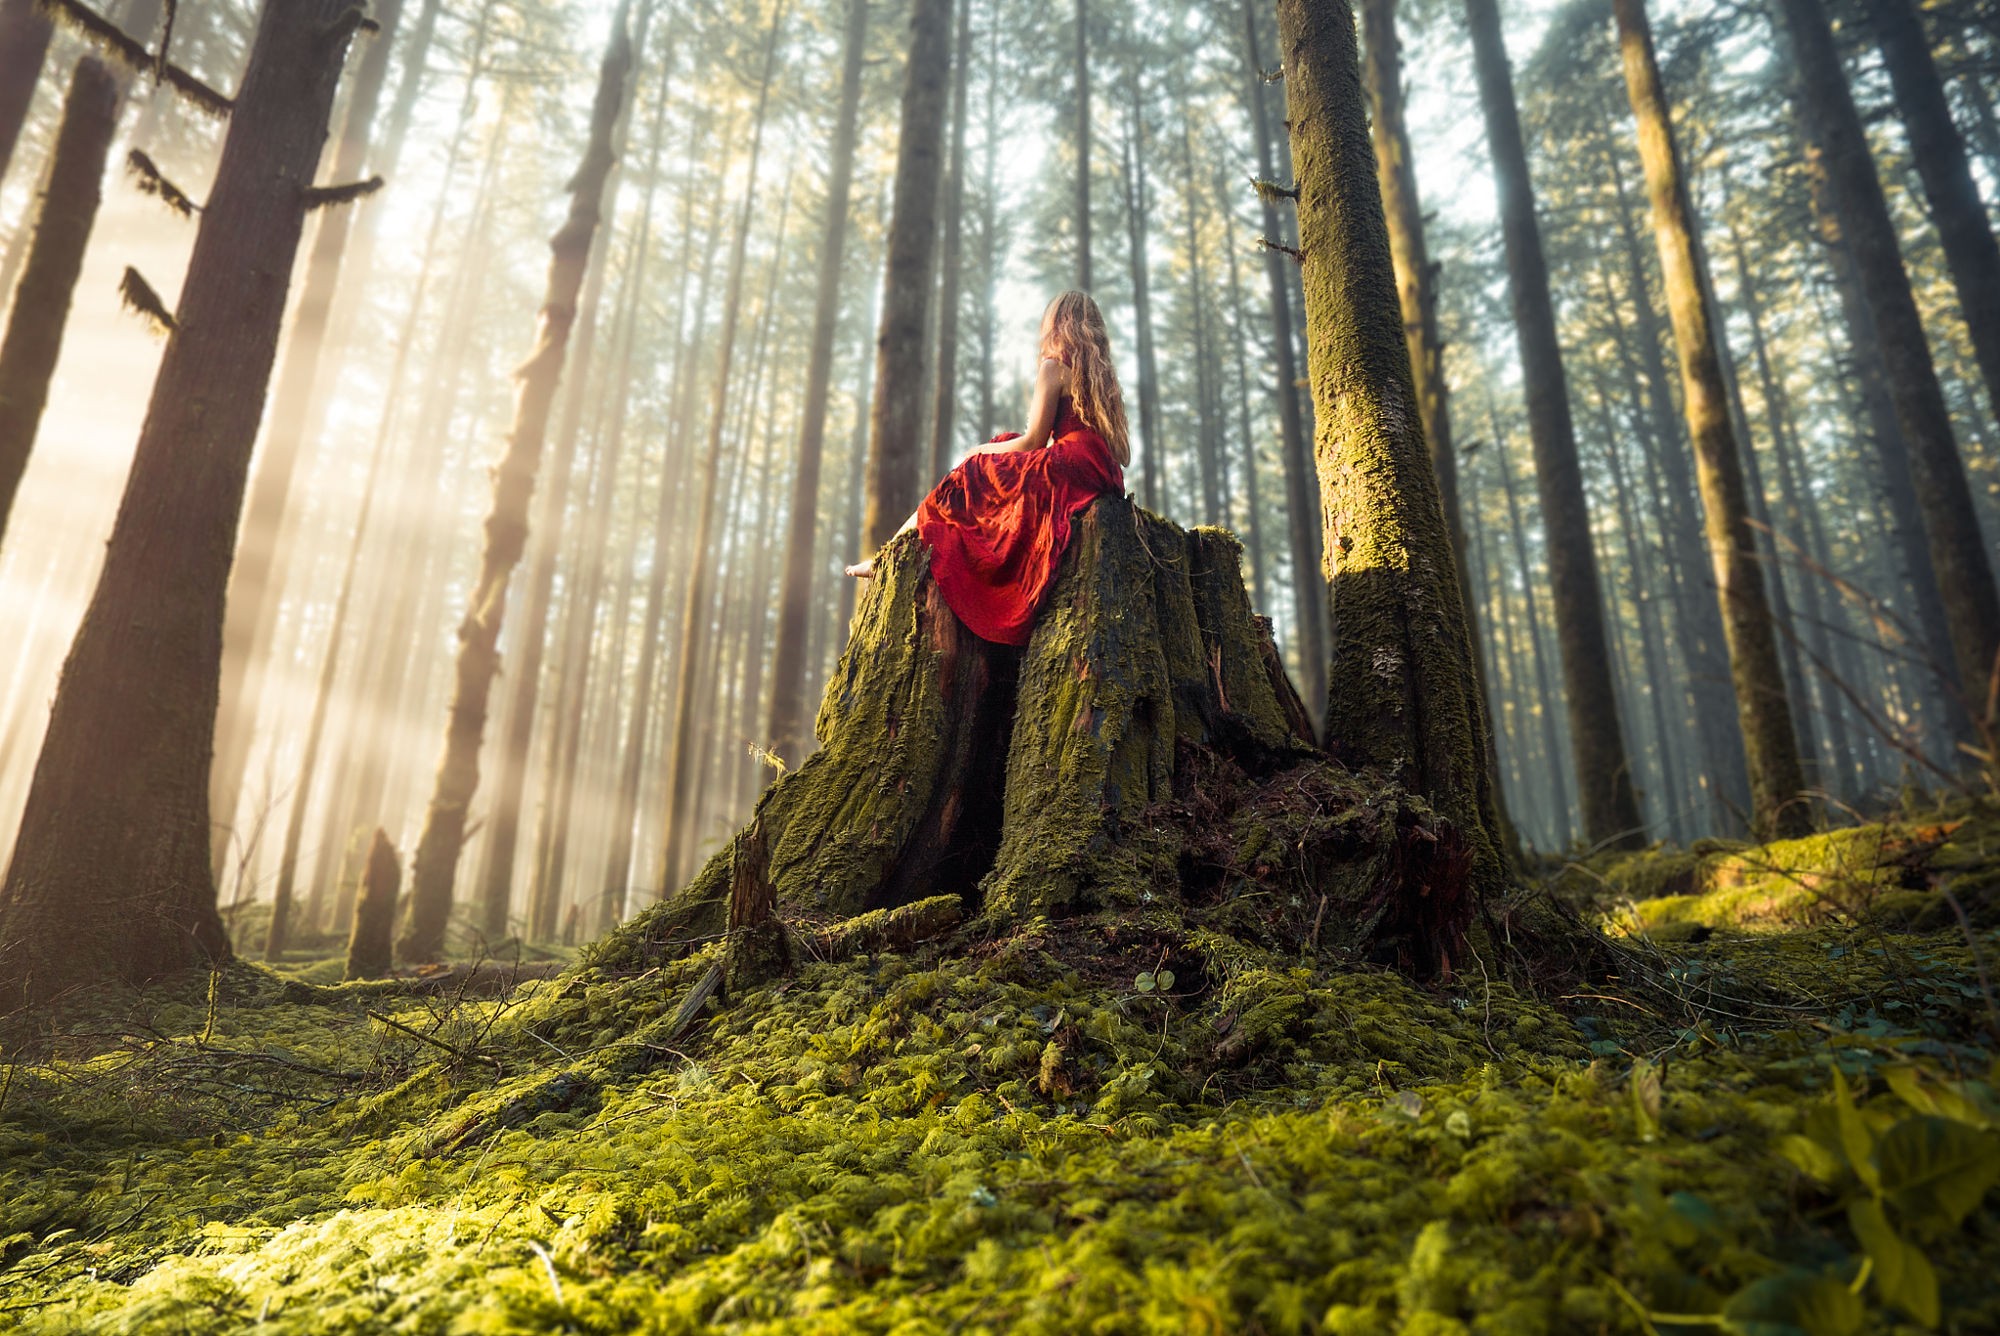 General 2000x1336 women trees forest women outdoors barefoot model blonde sitting wood dress red dress nature red clothing long hair